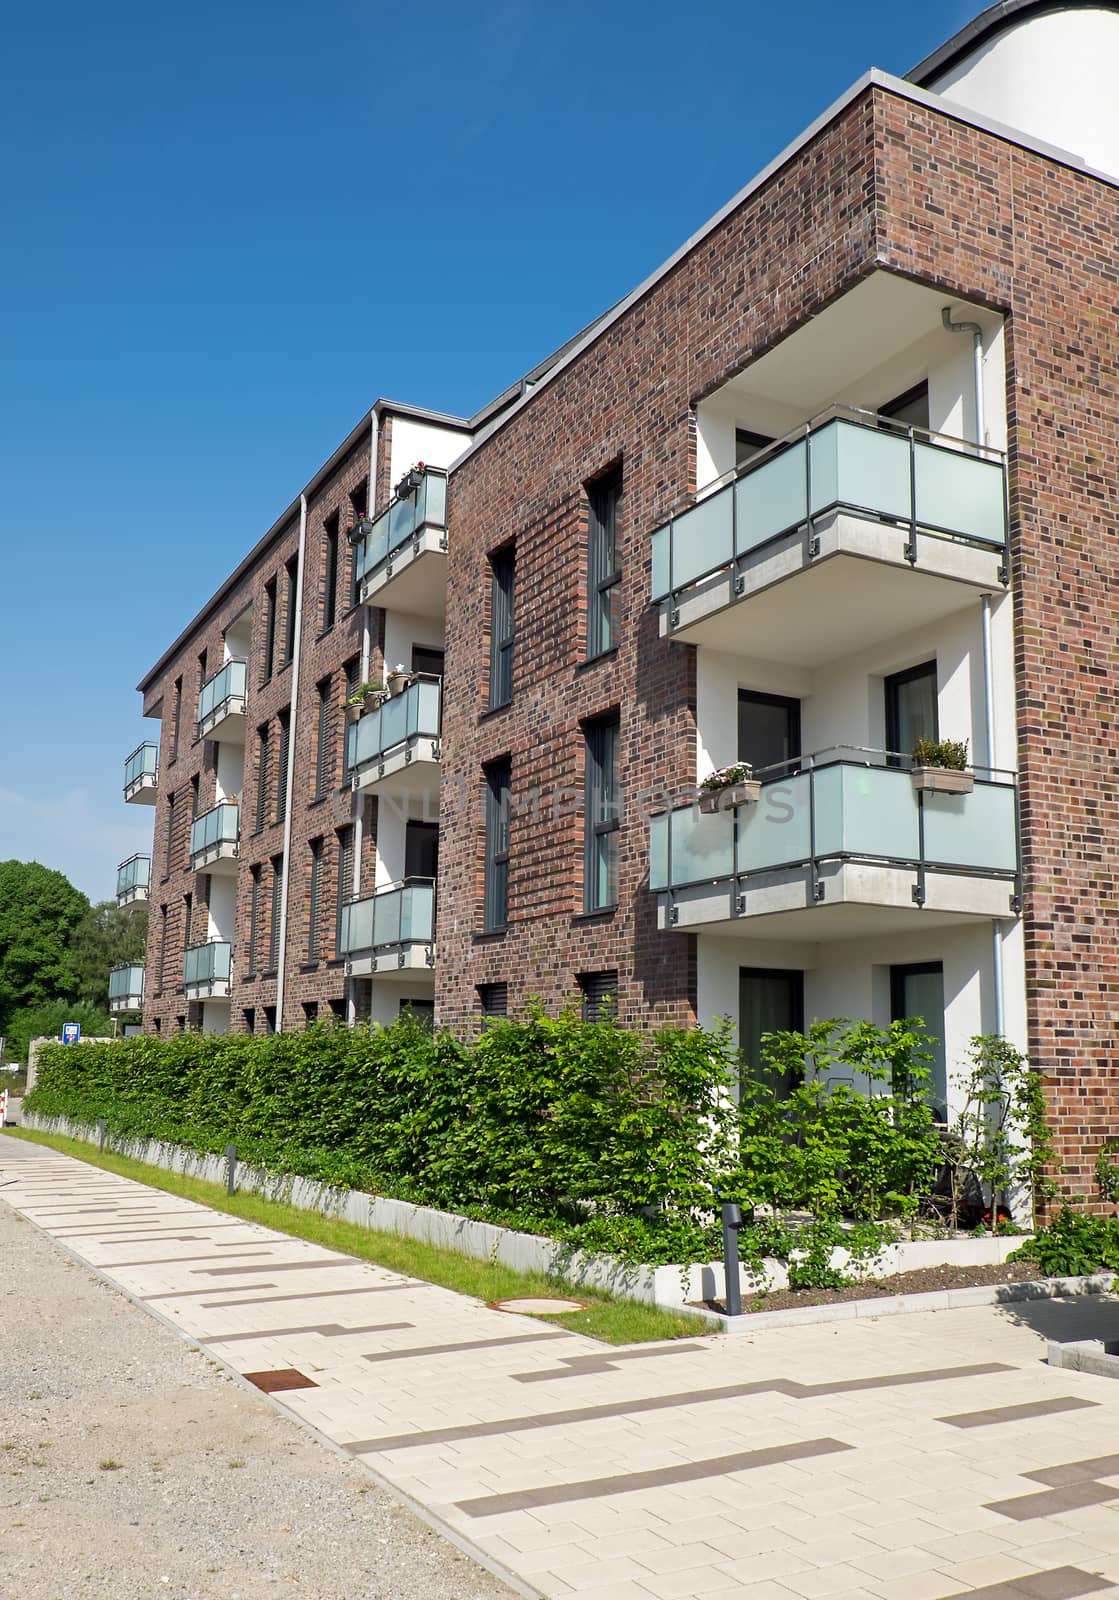 A recently constructed block of flats seen in Germany